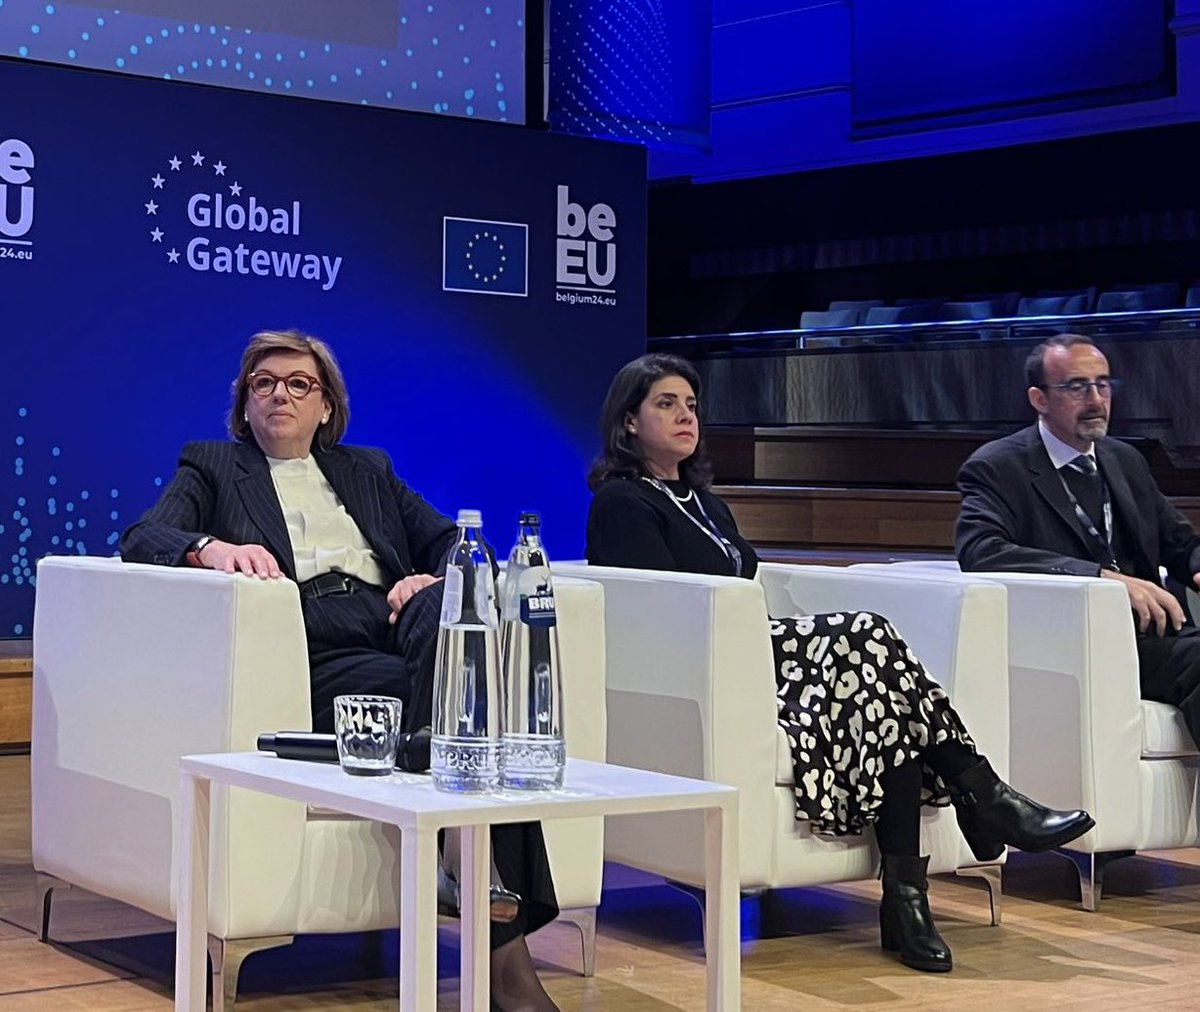 Happy to join @EU_Partnerships and #TeamEurope at the #GlobalGateway Education Forum for an insightful conversation on the critical need for increased investment in education and practical solutions for better education financing. Watch the live streaming: europa.eu/!VMycyR